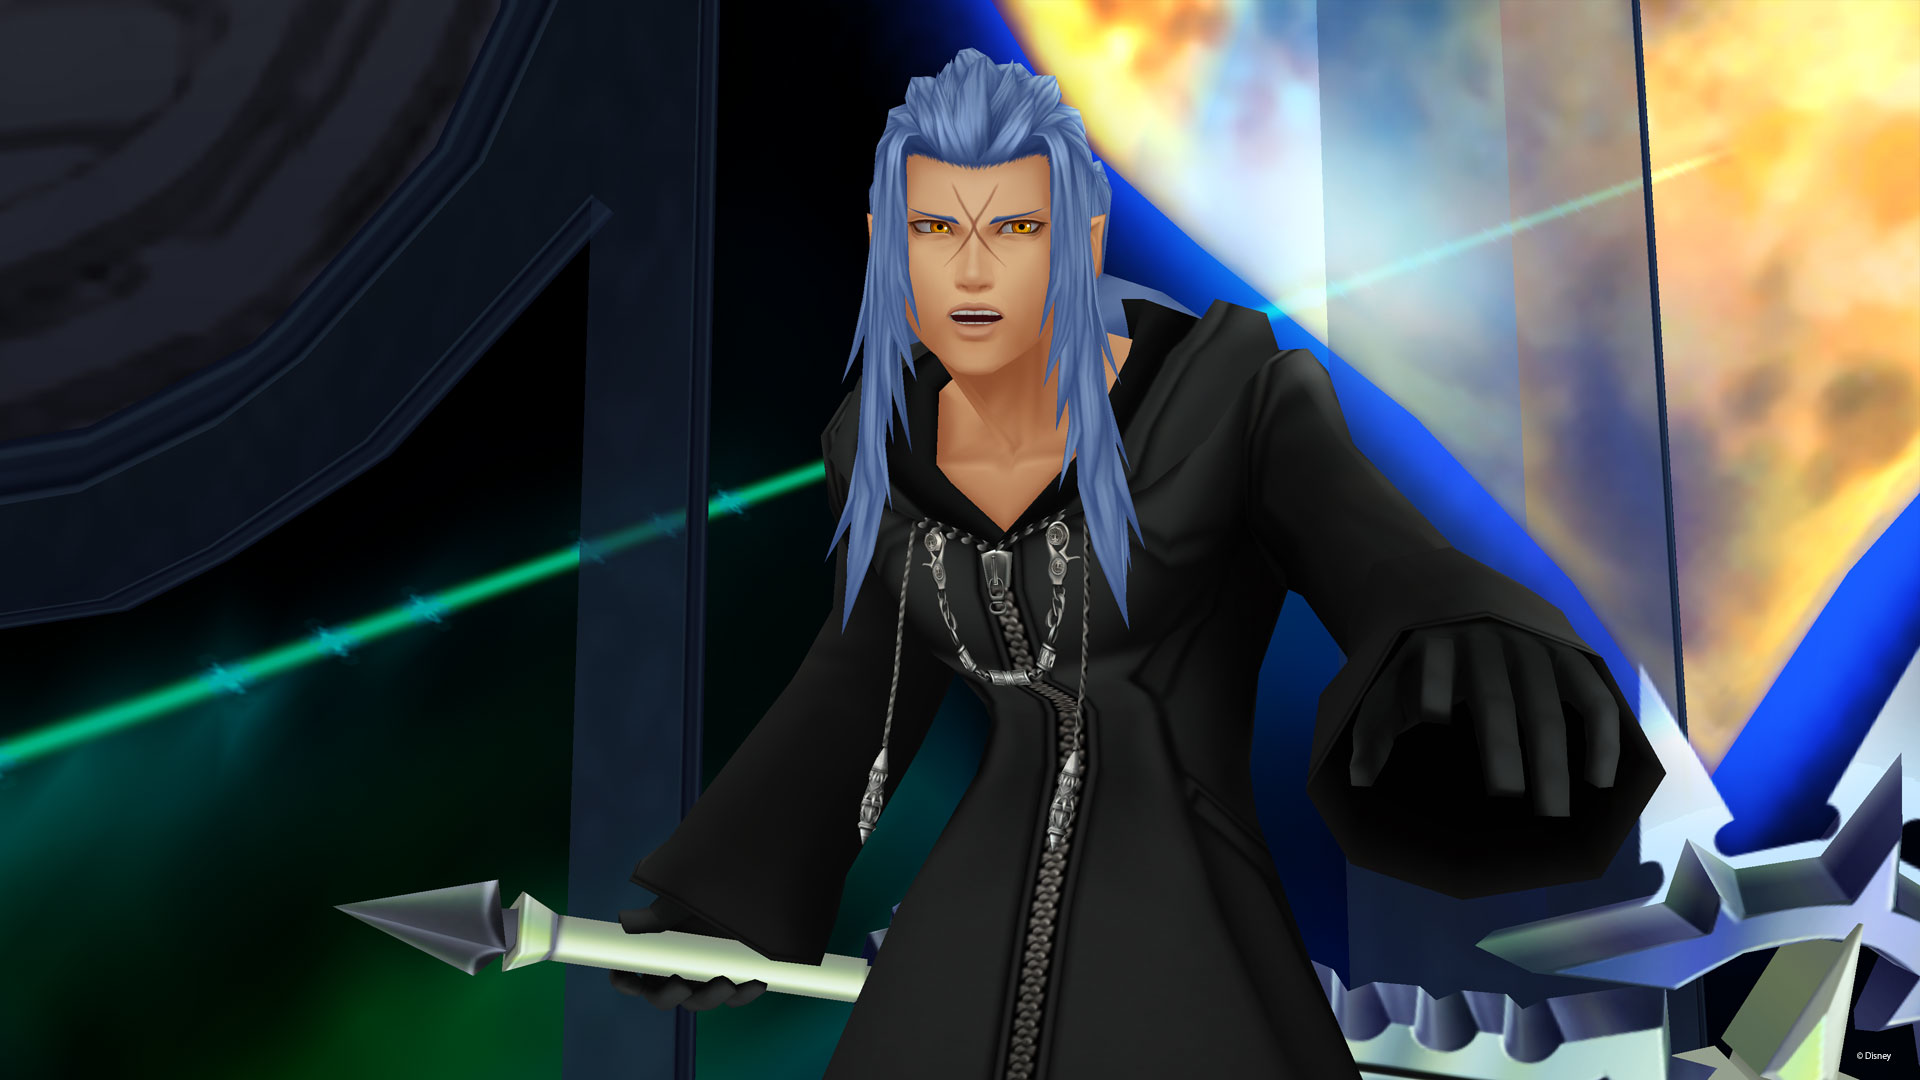 Note the yellow eyes: Saix was already "norted" before KH2. 